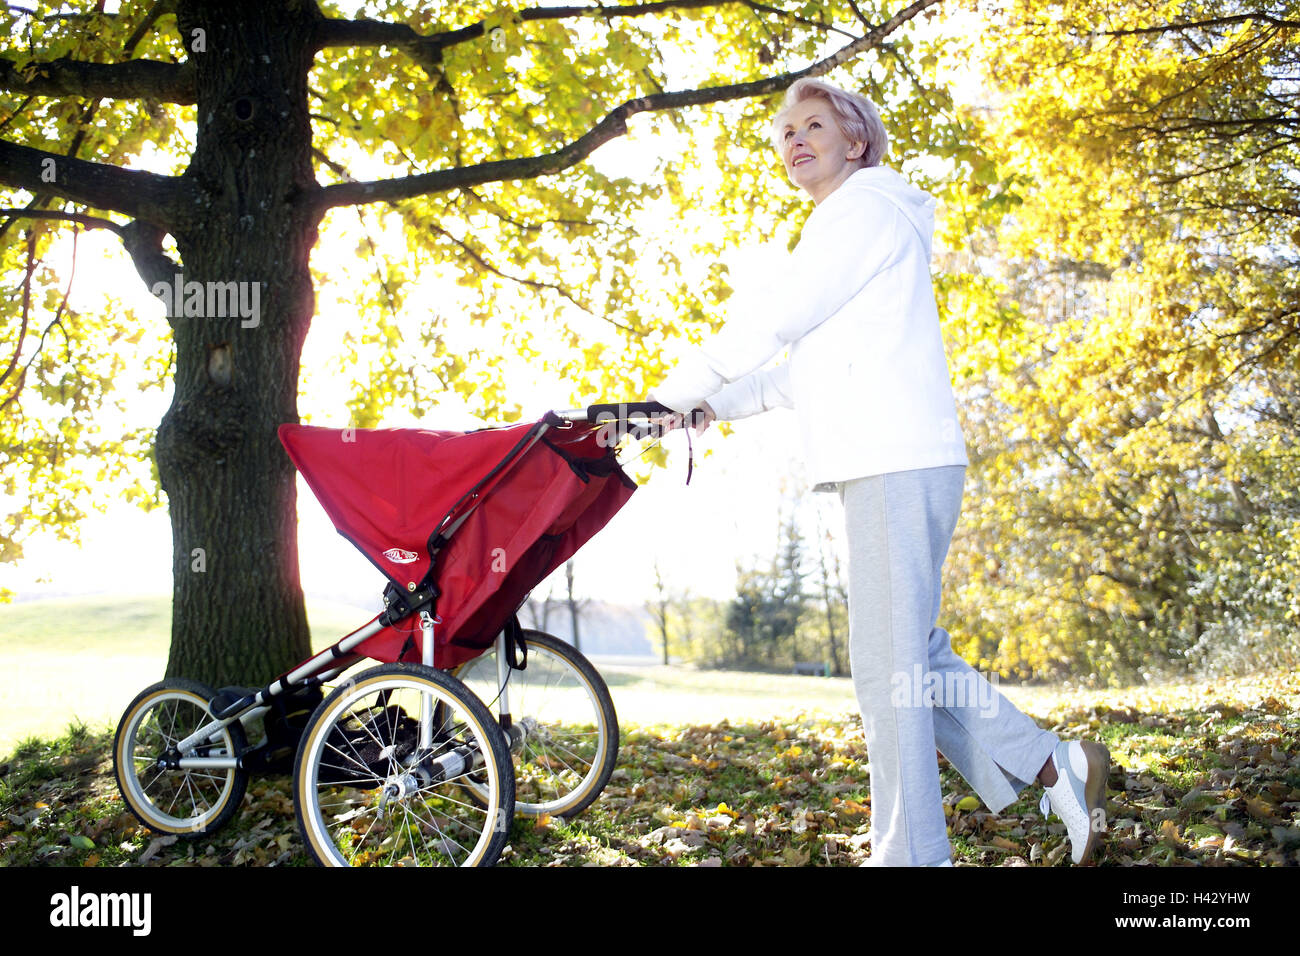 Park, senior, baby jogger, side view, autumn park, woman, 55-65 years, Best Agers, Jung-remaining, granny, baby carriage, walk, park walk, health, fitness, activity, activity, leisure time equaliser, lifestyle, autumnally, season, 50-60 years, 60-70 years, 50-60 years, 60-70 years Stock Photo